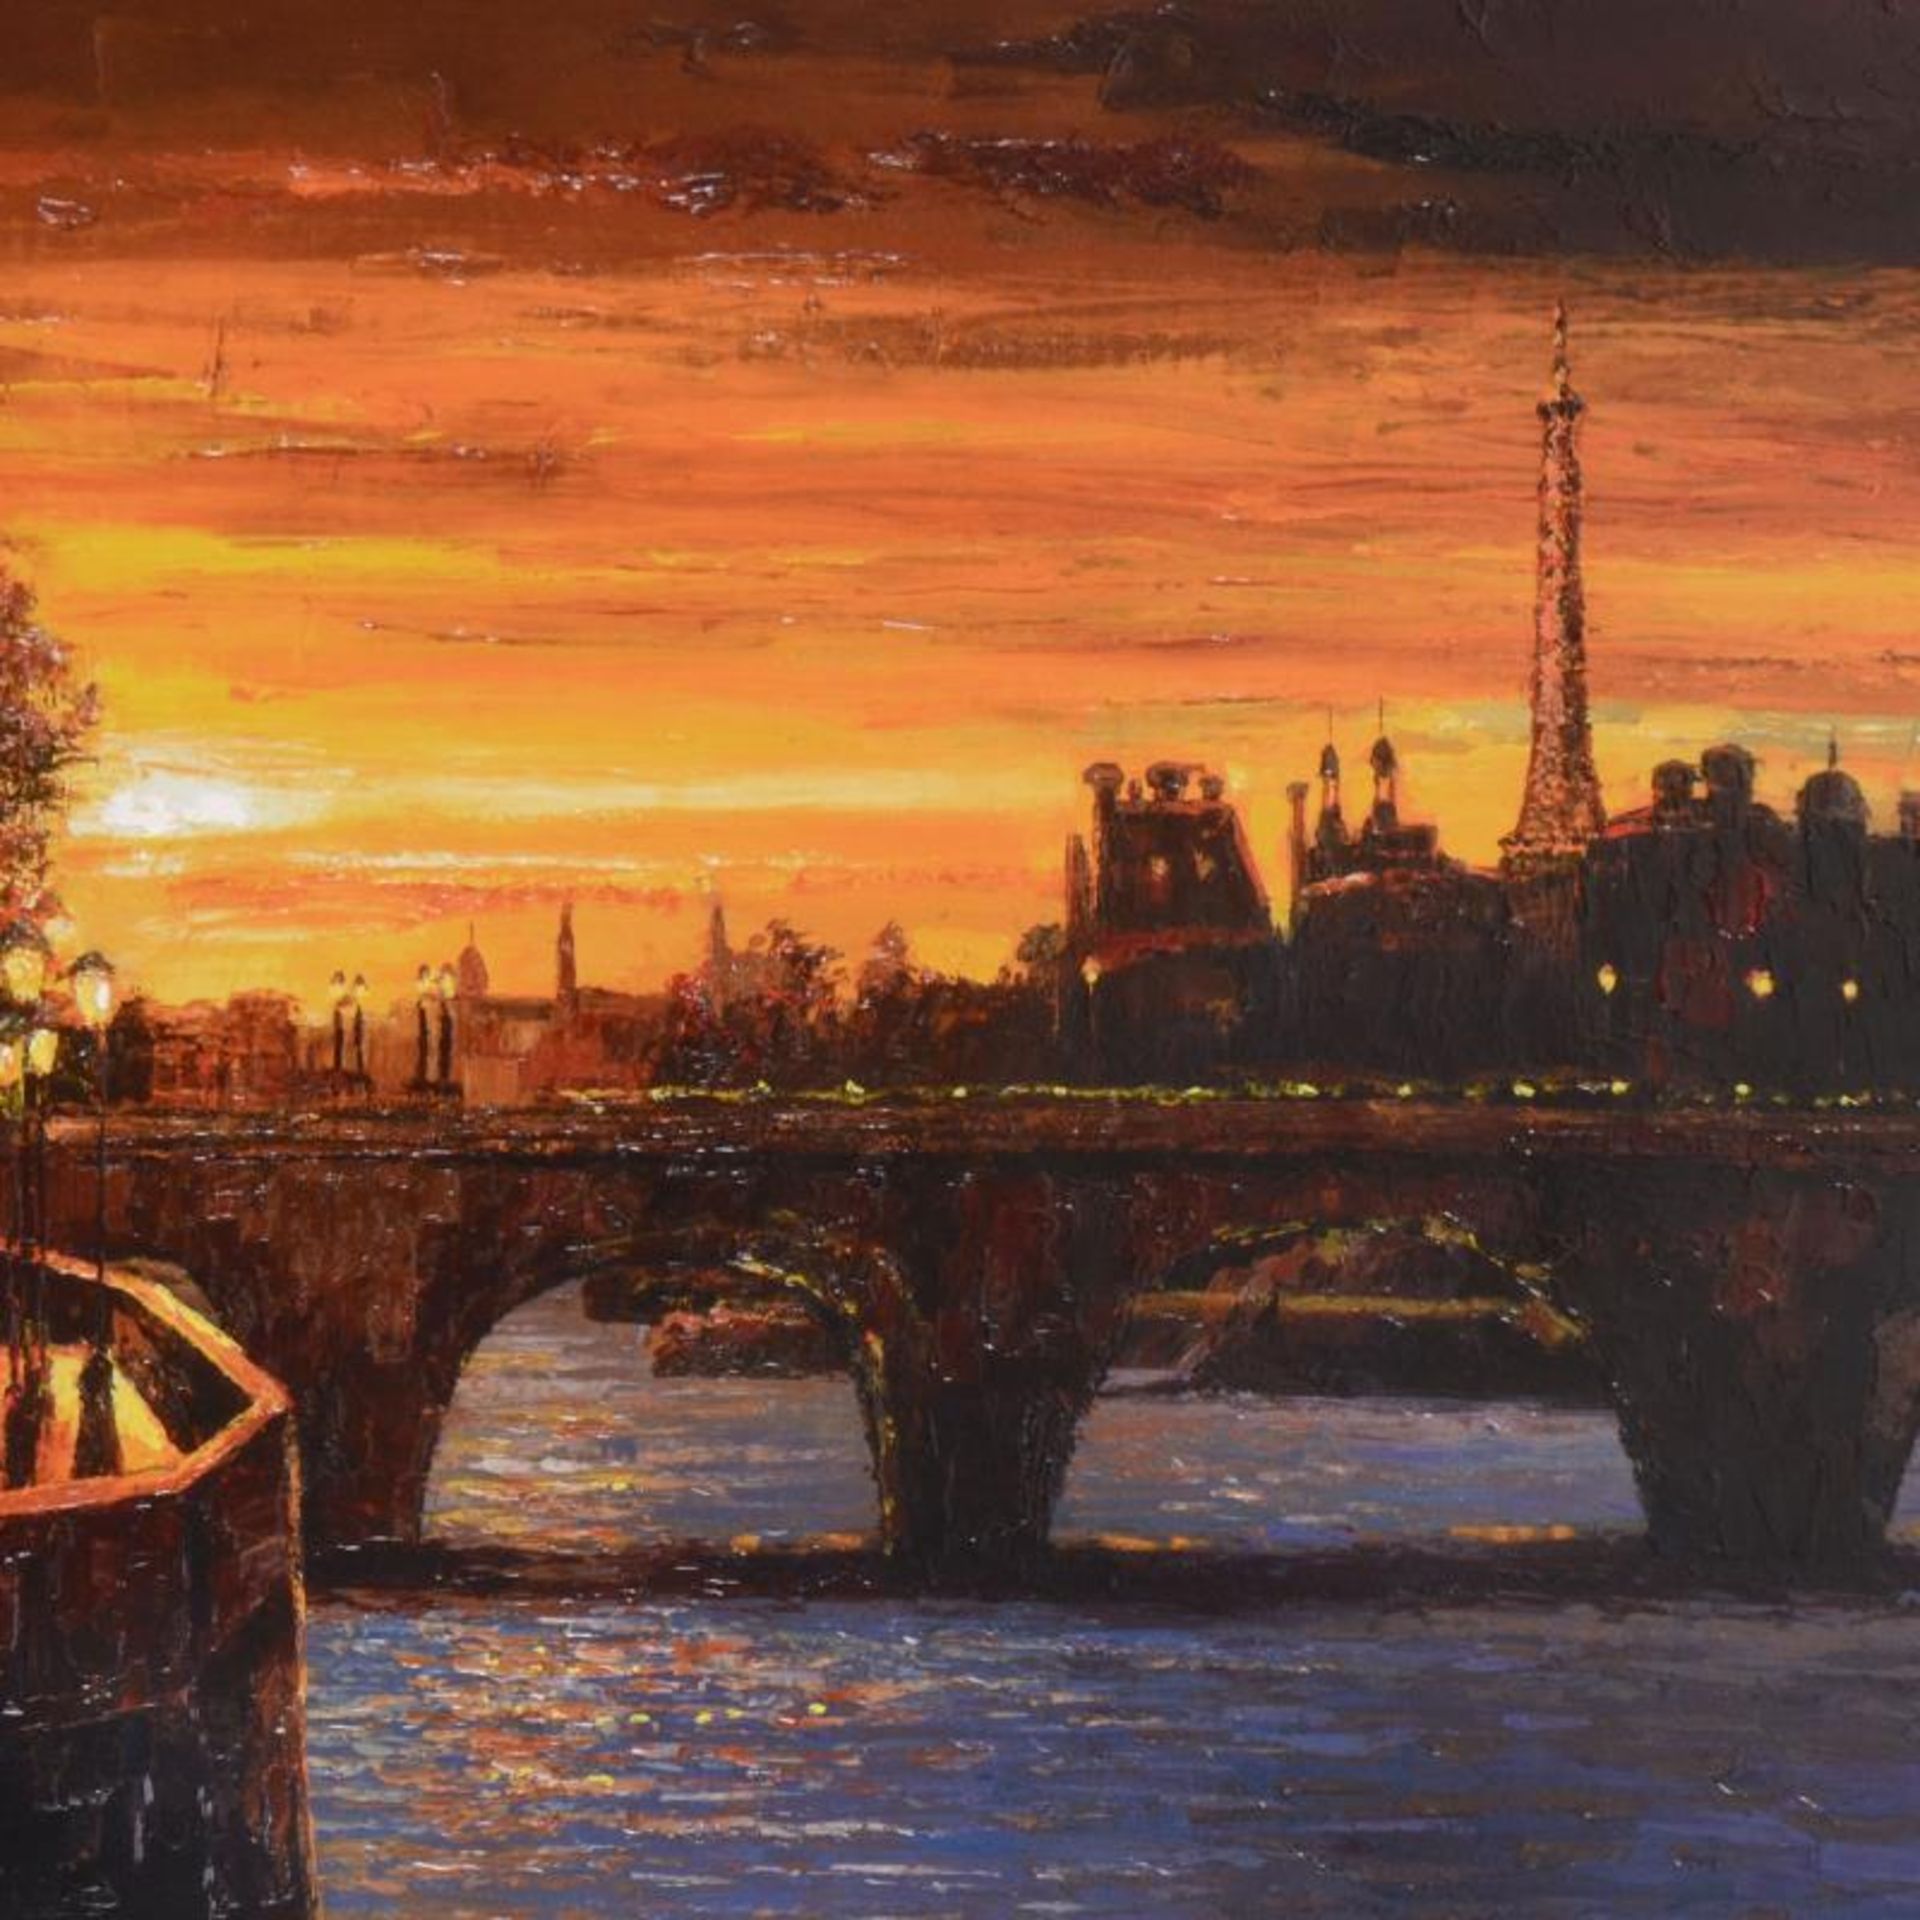 Twilight On The Seine II by Behrens (1933-2014) - Image 2 of 2